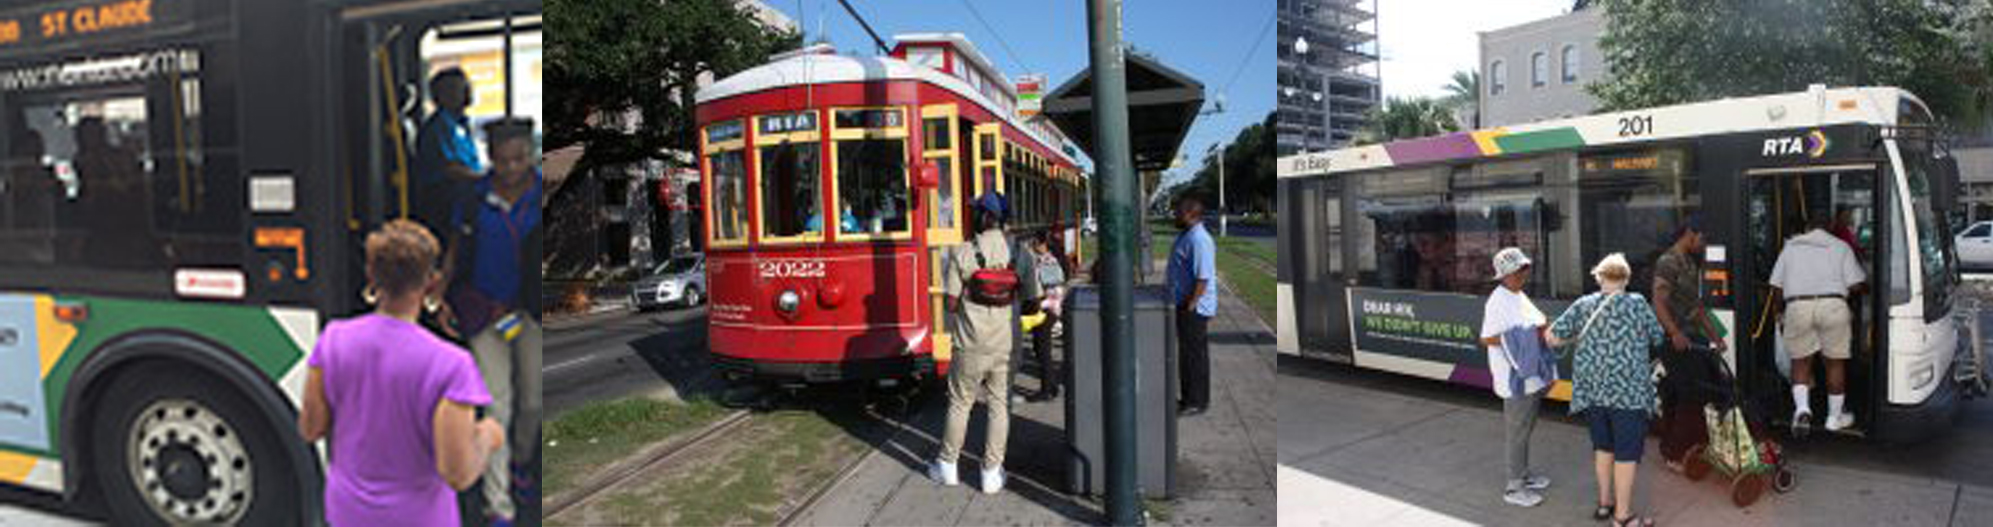 Bus and Streetcar Stops in NOLA